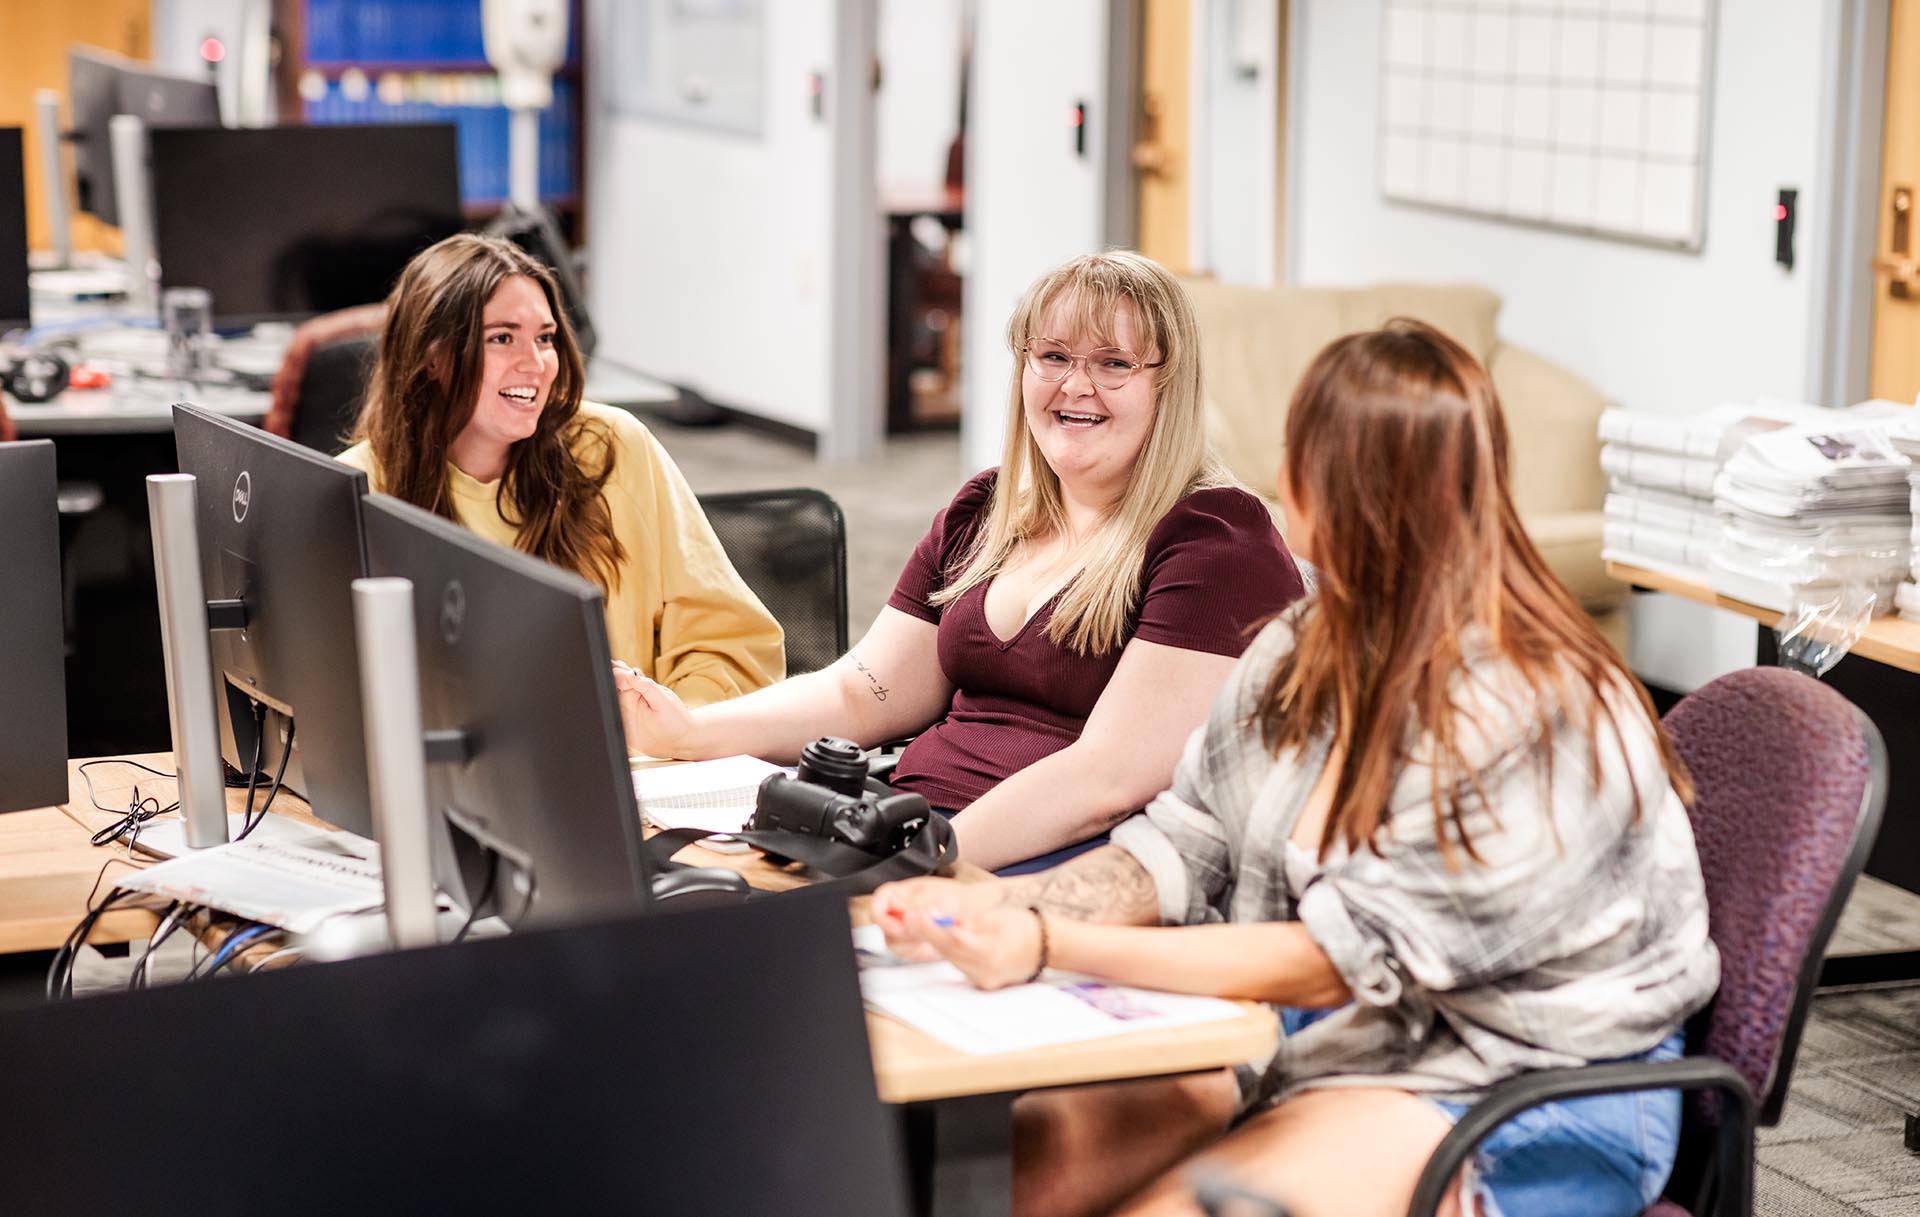 MSU Denver journalism students, Reanna Medina, features editor, left, Sara Martin, editor-in-chief, center, and Tiffani Hernandez, managing editor, work in the Met Media newsroom in preparation for the next issue of the student run newspaper, The Metropolitan.